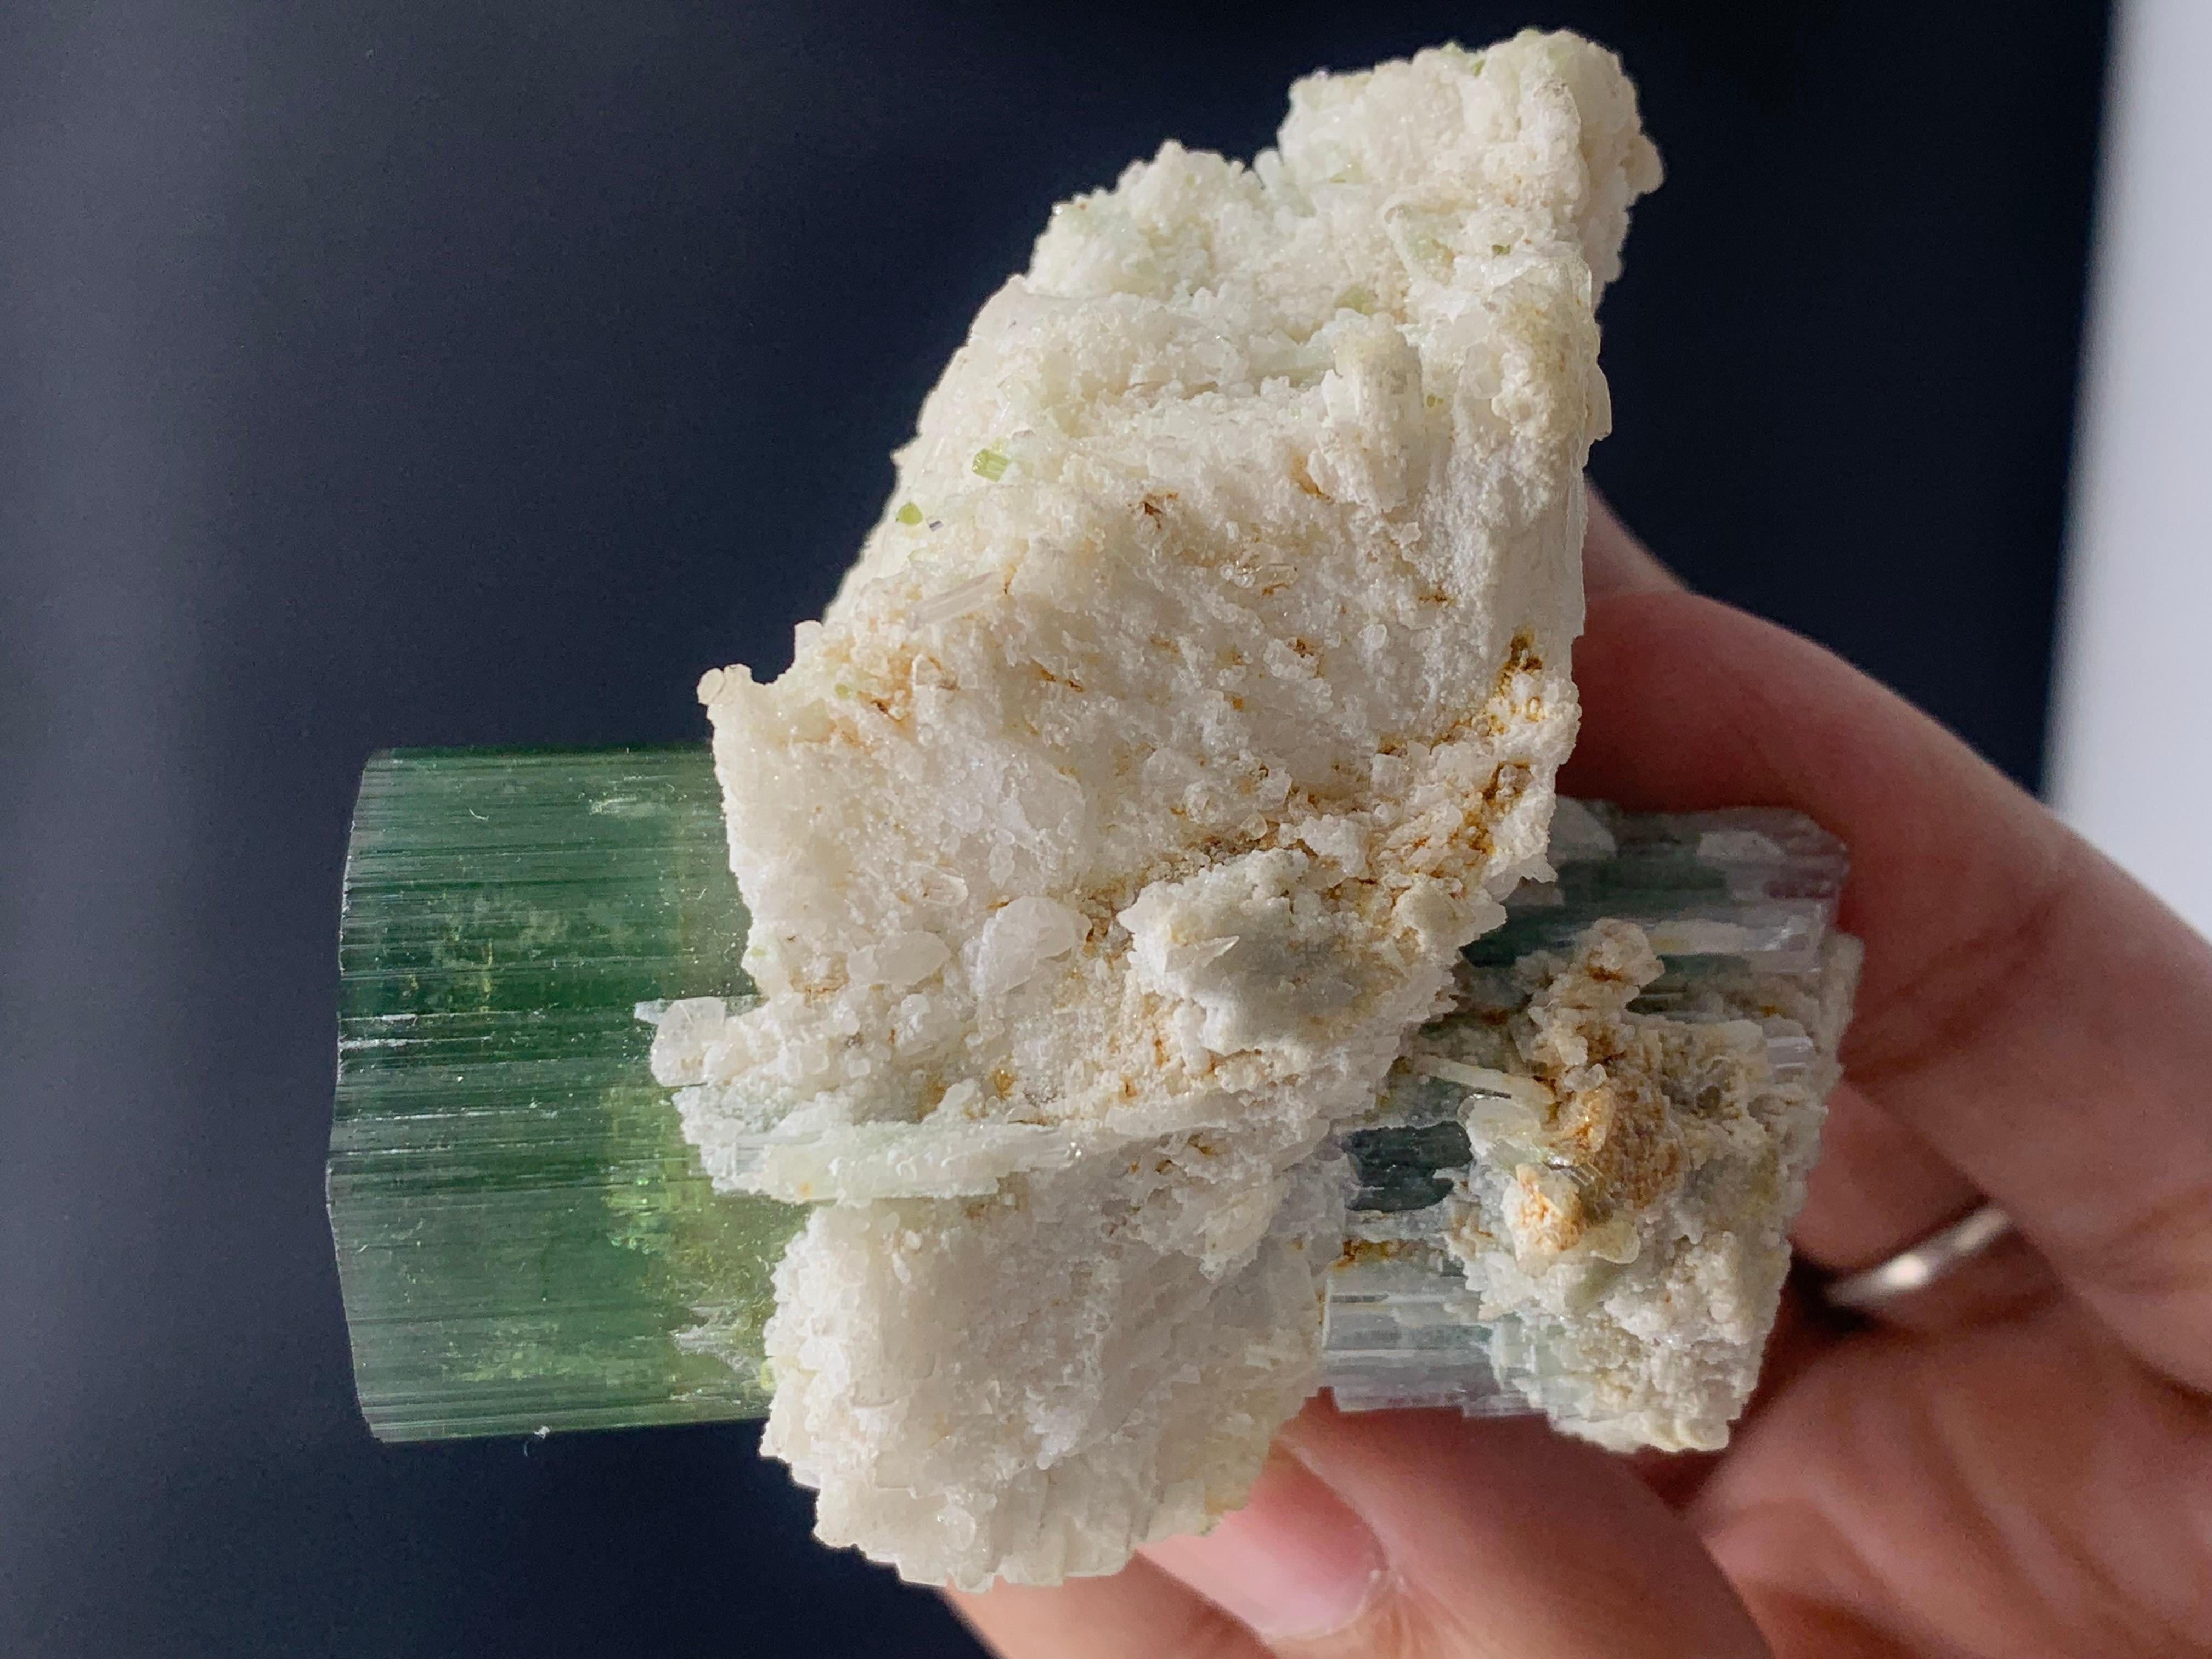 Magnificent Green Tourmaline Specimen From Afghanistan 
WEIGHT: 149.99 grams
DIMENSIONS: 6.4 x 6.7 x 4.5 Cm
ORIGIN: Afghanistan
TREATMENT : None

Tourmaline is an extremely popular gemstone; the name Tourmaline is derived from Turamali, which